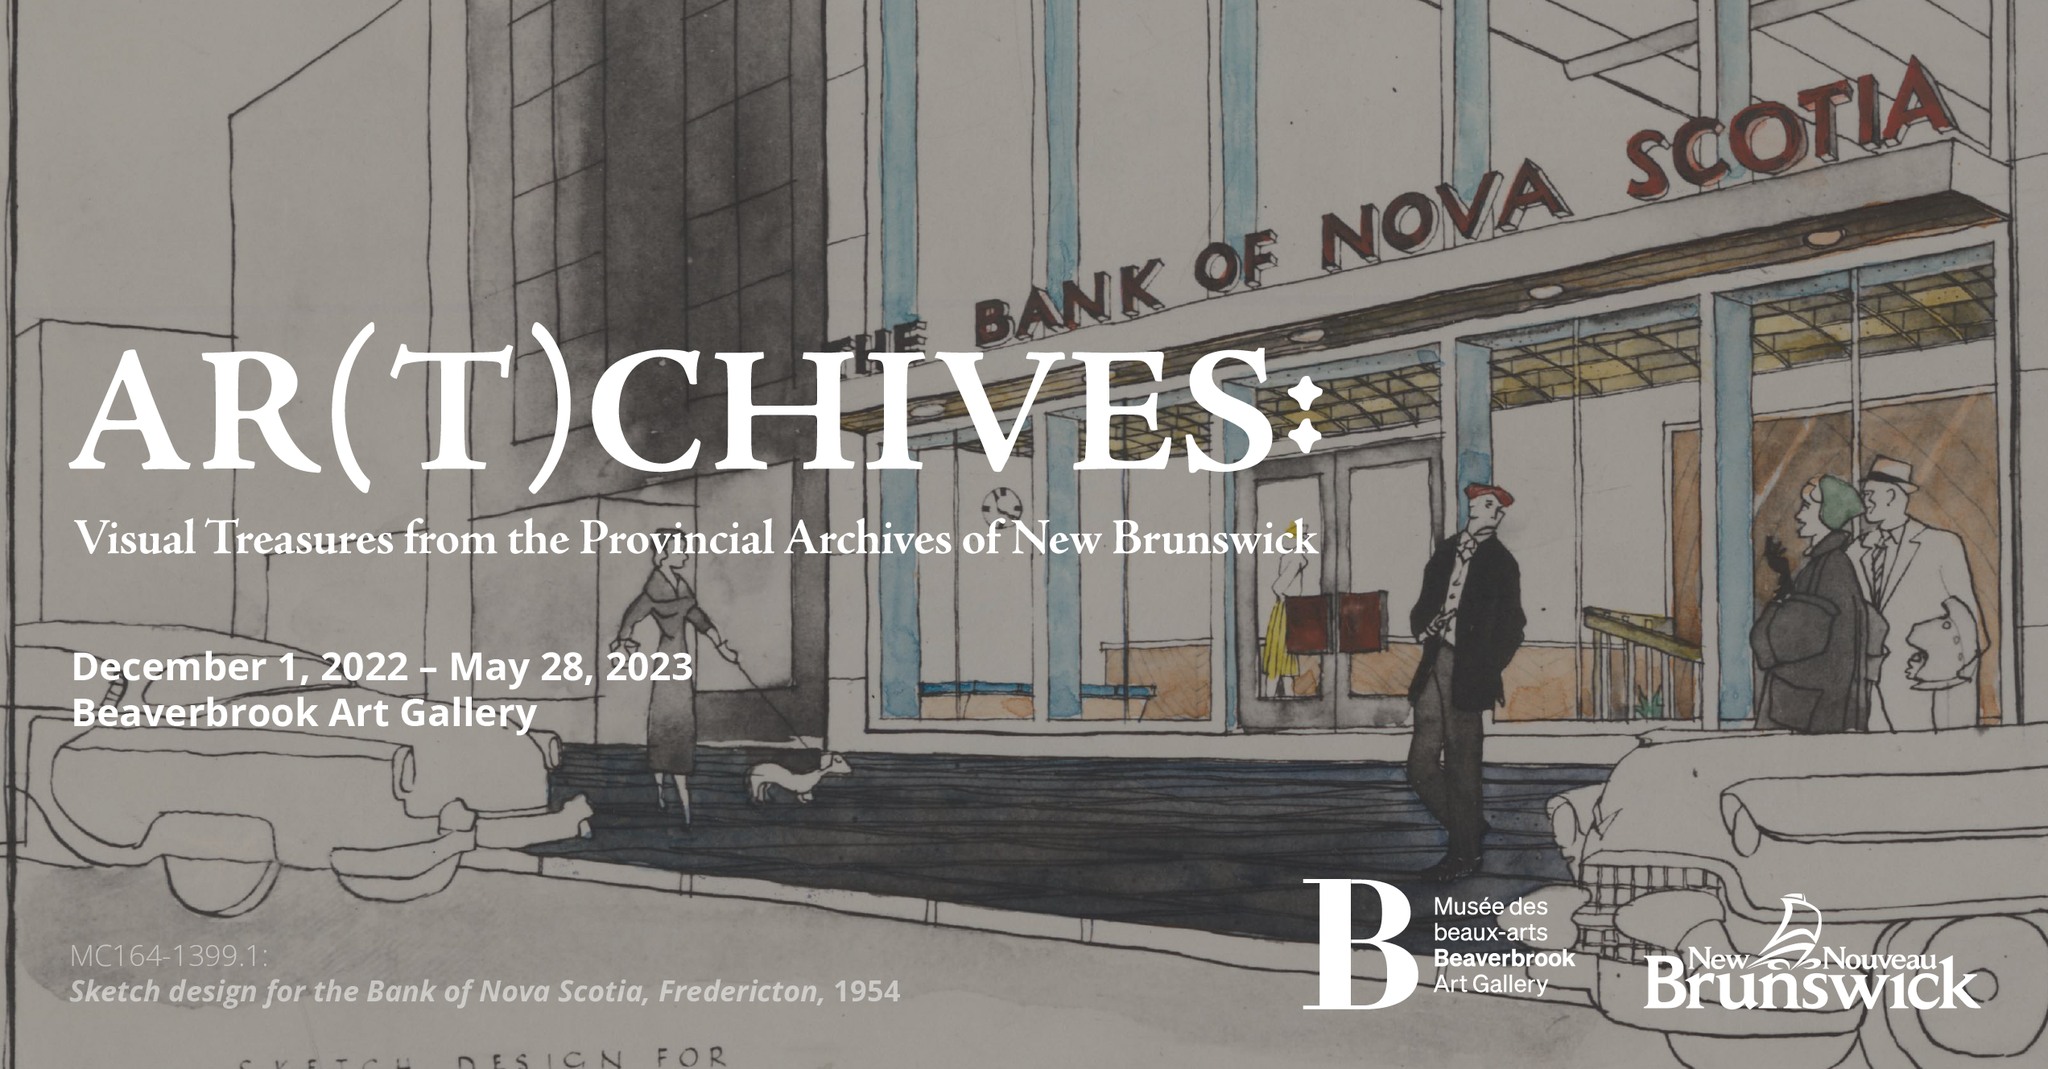 Ar(t)chives: Visual Treasures from the Provincial Archives of New Brunswick. December 1, 2022 - May 28, 2023. Beaverbrook Art Gallery